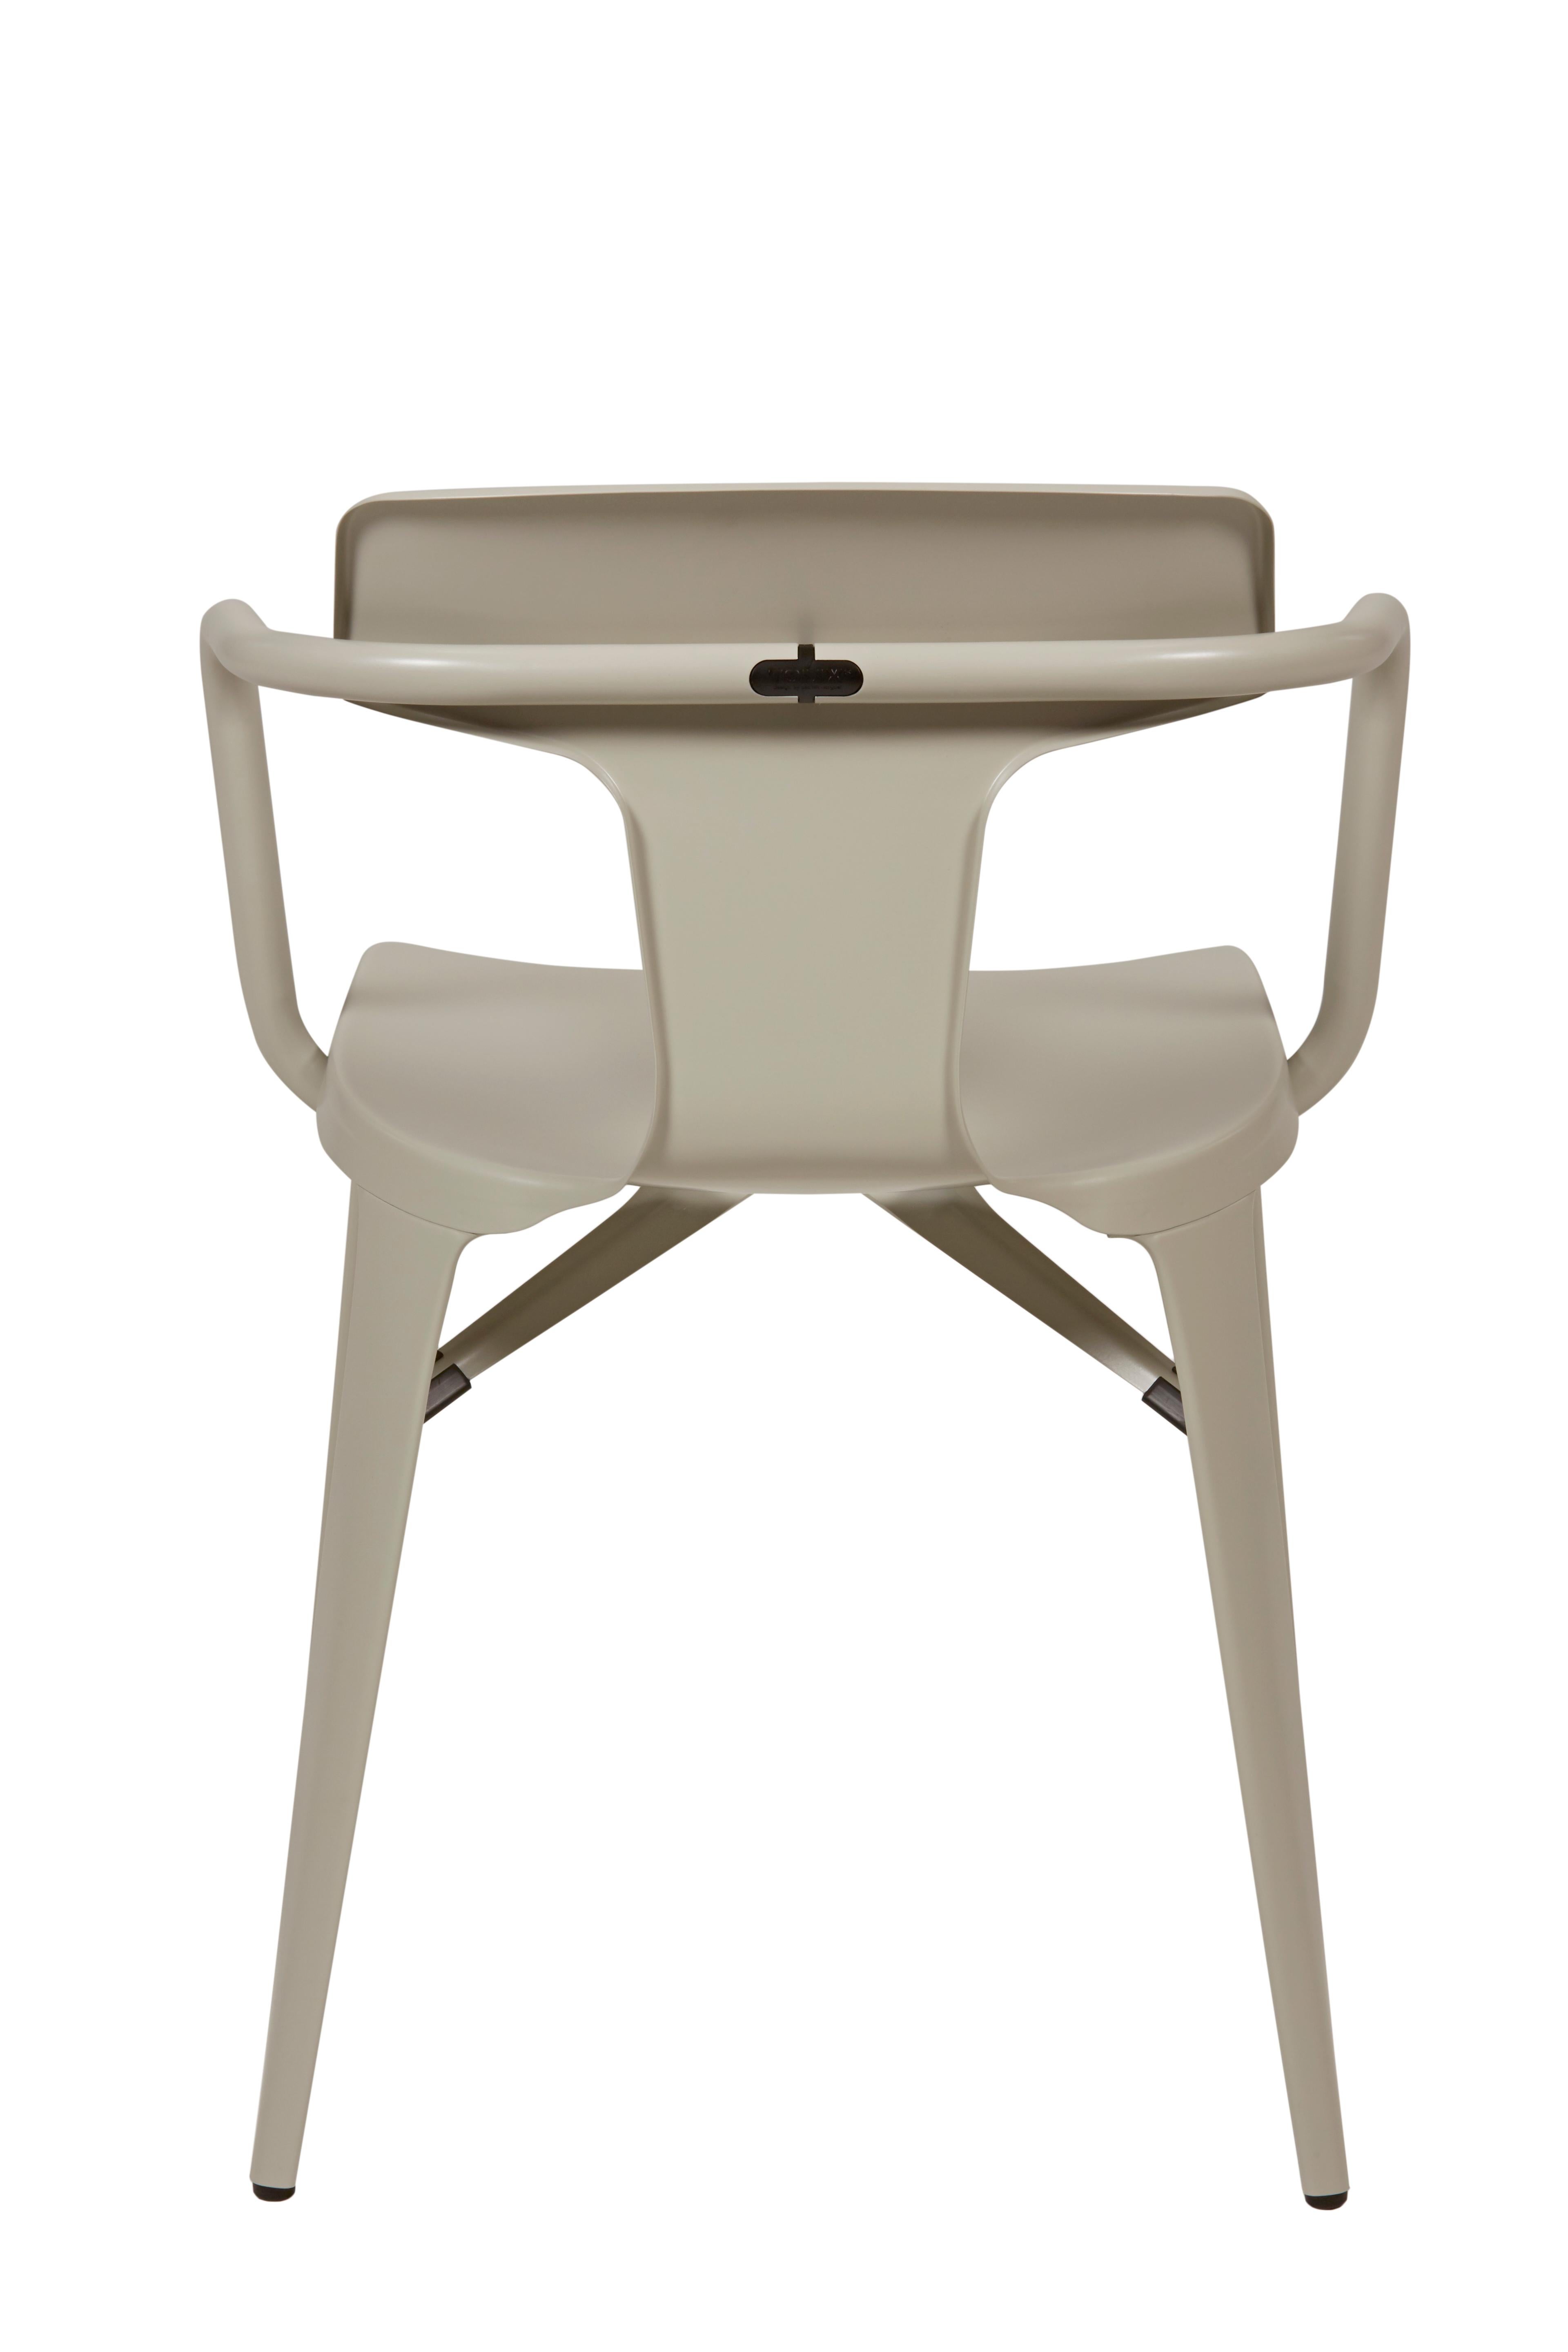 Im Angebot: T14 Chair in Pop Colors by Patrick Norguet and Tolix, Beige (Gris Soie) 2